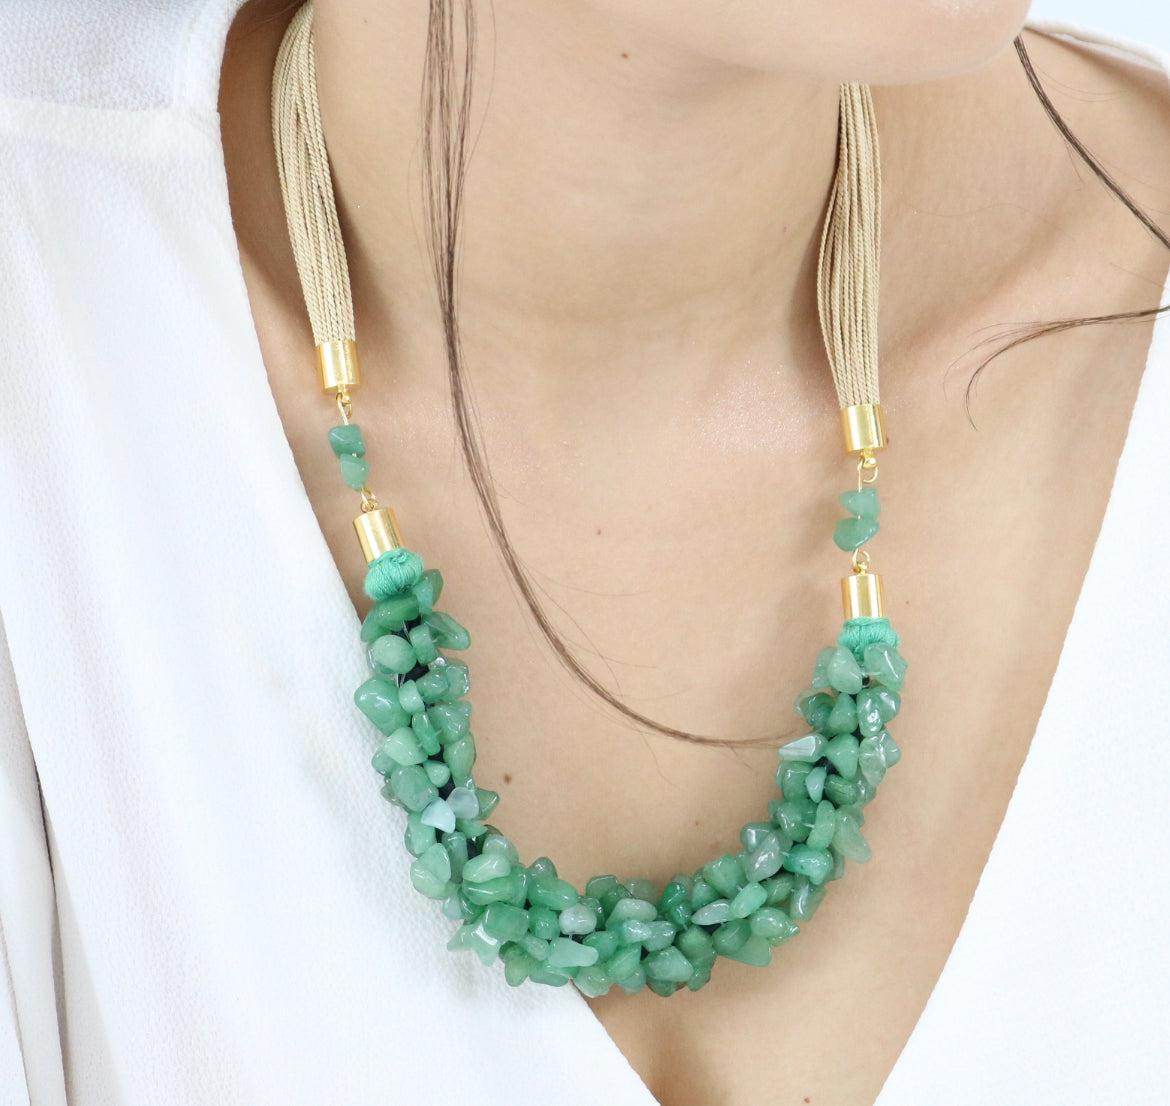 Necklace with Green Quartz Treasures of Brazil